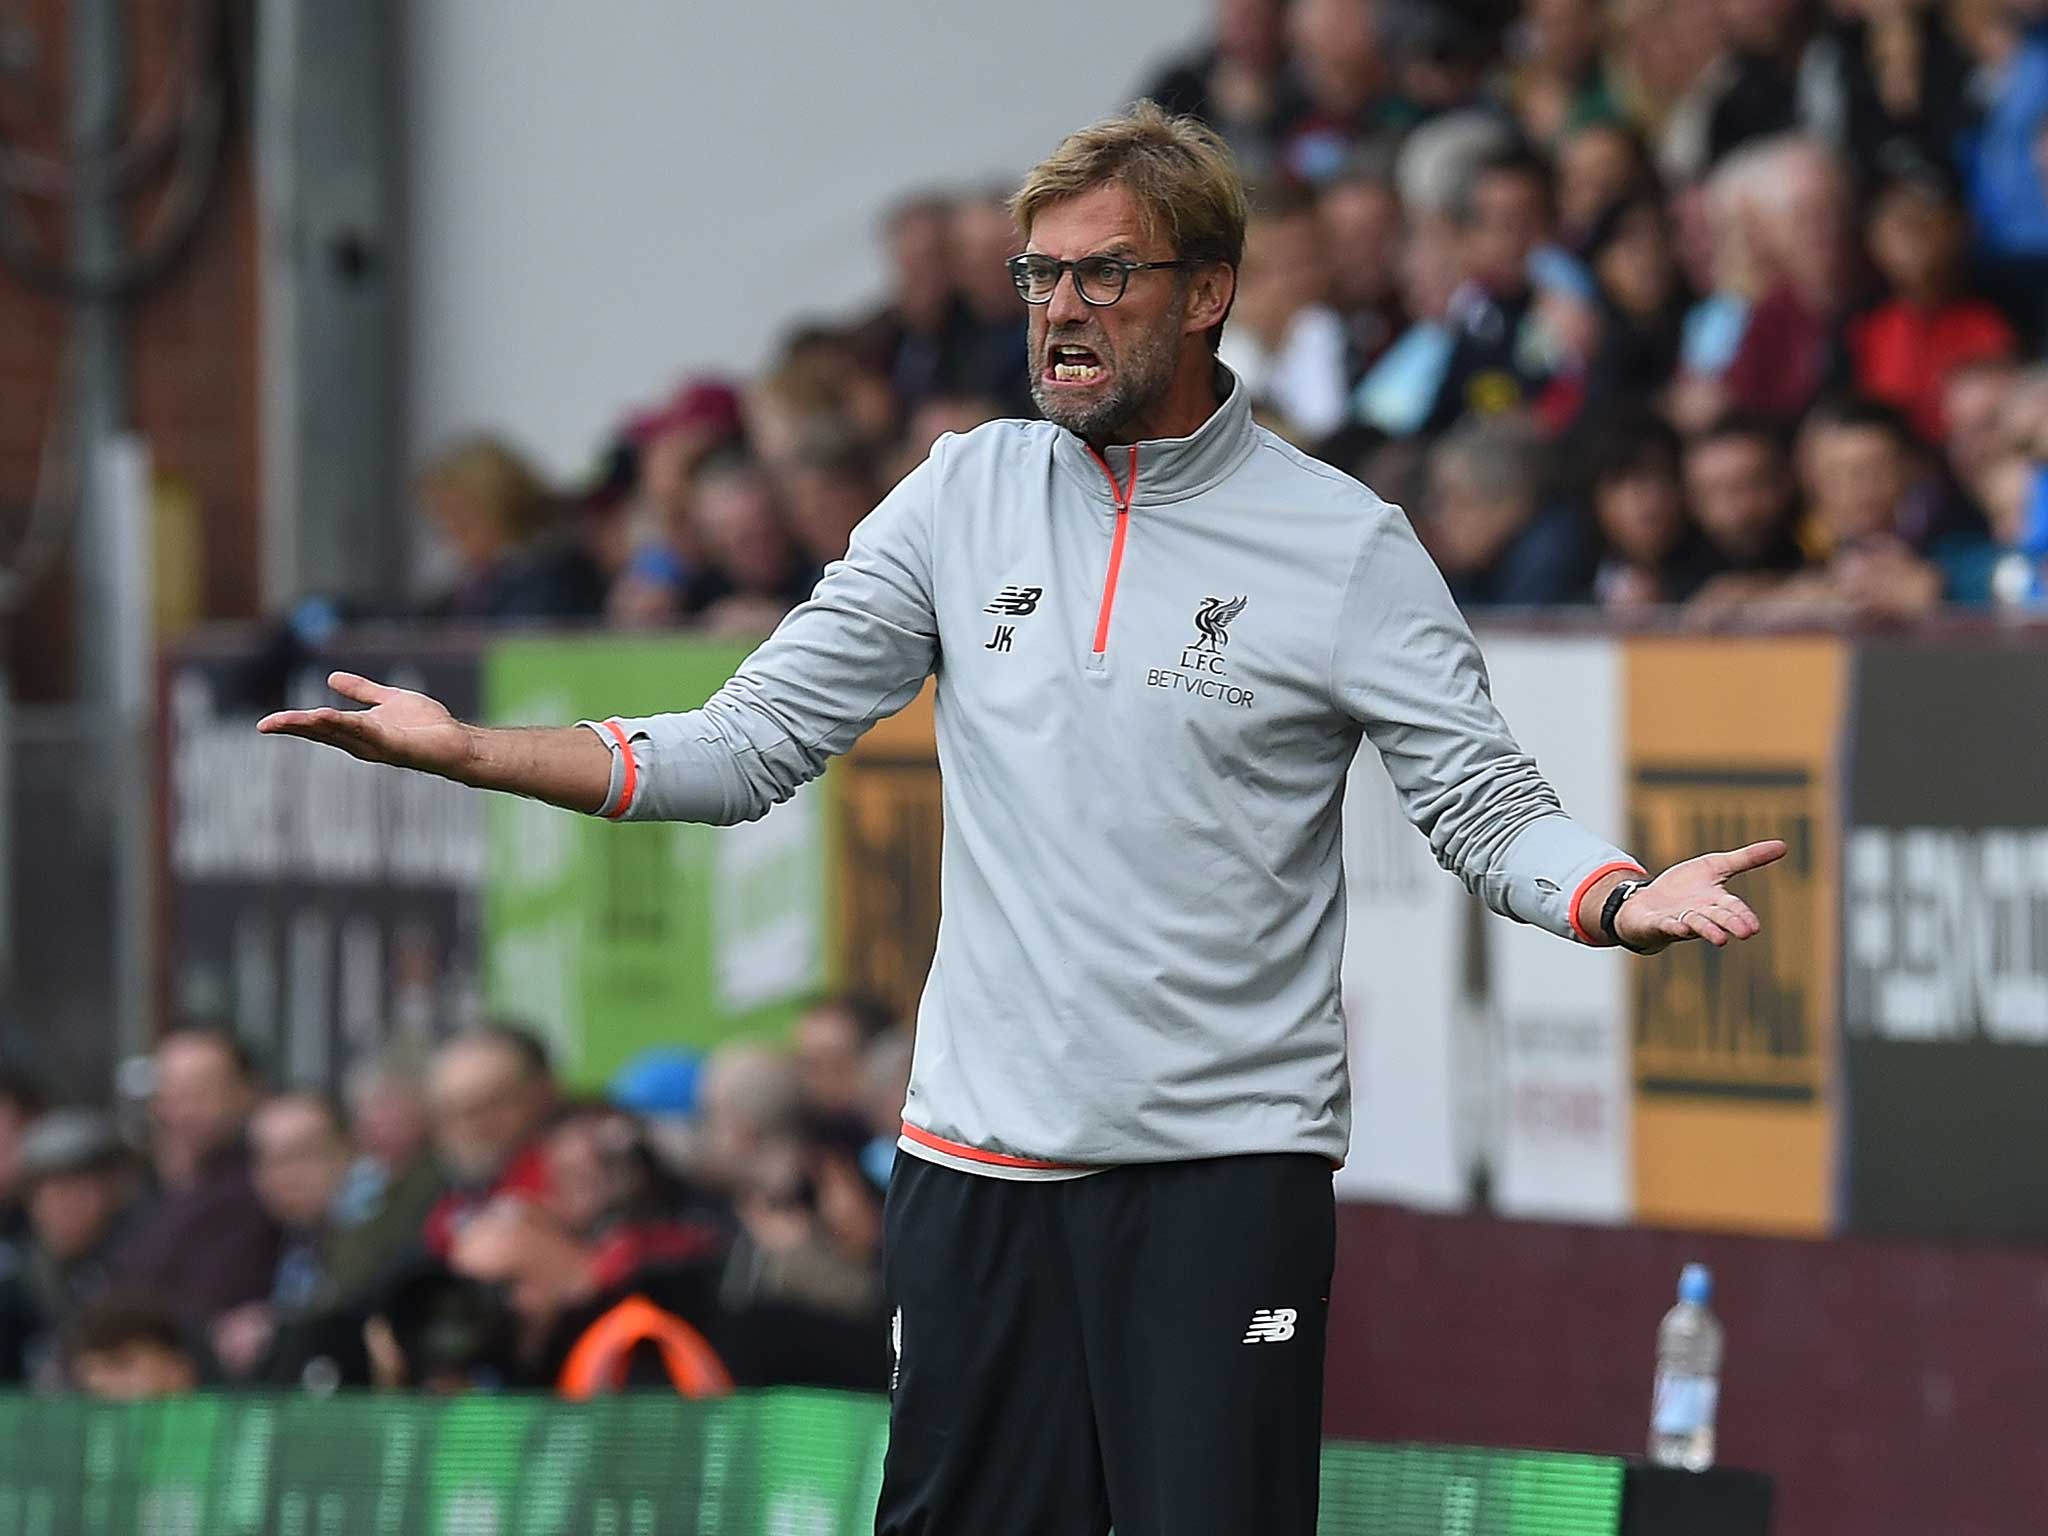 Jurgen Klopp revealed he was ‘angry’ after the defeat by Burnley